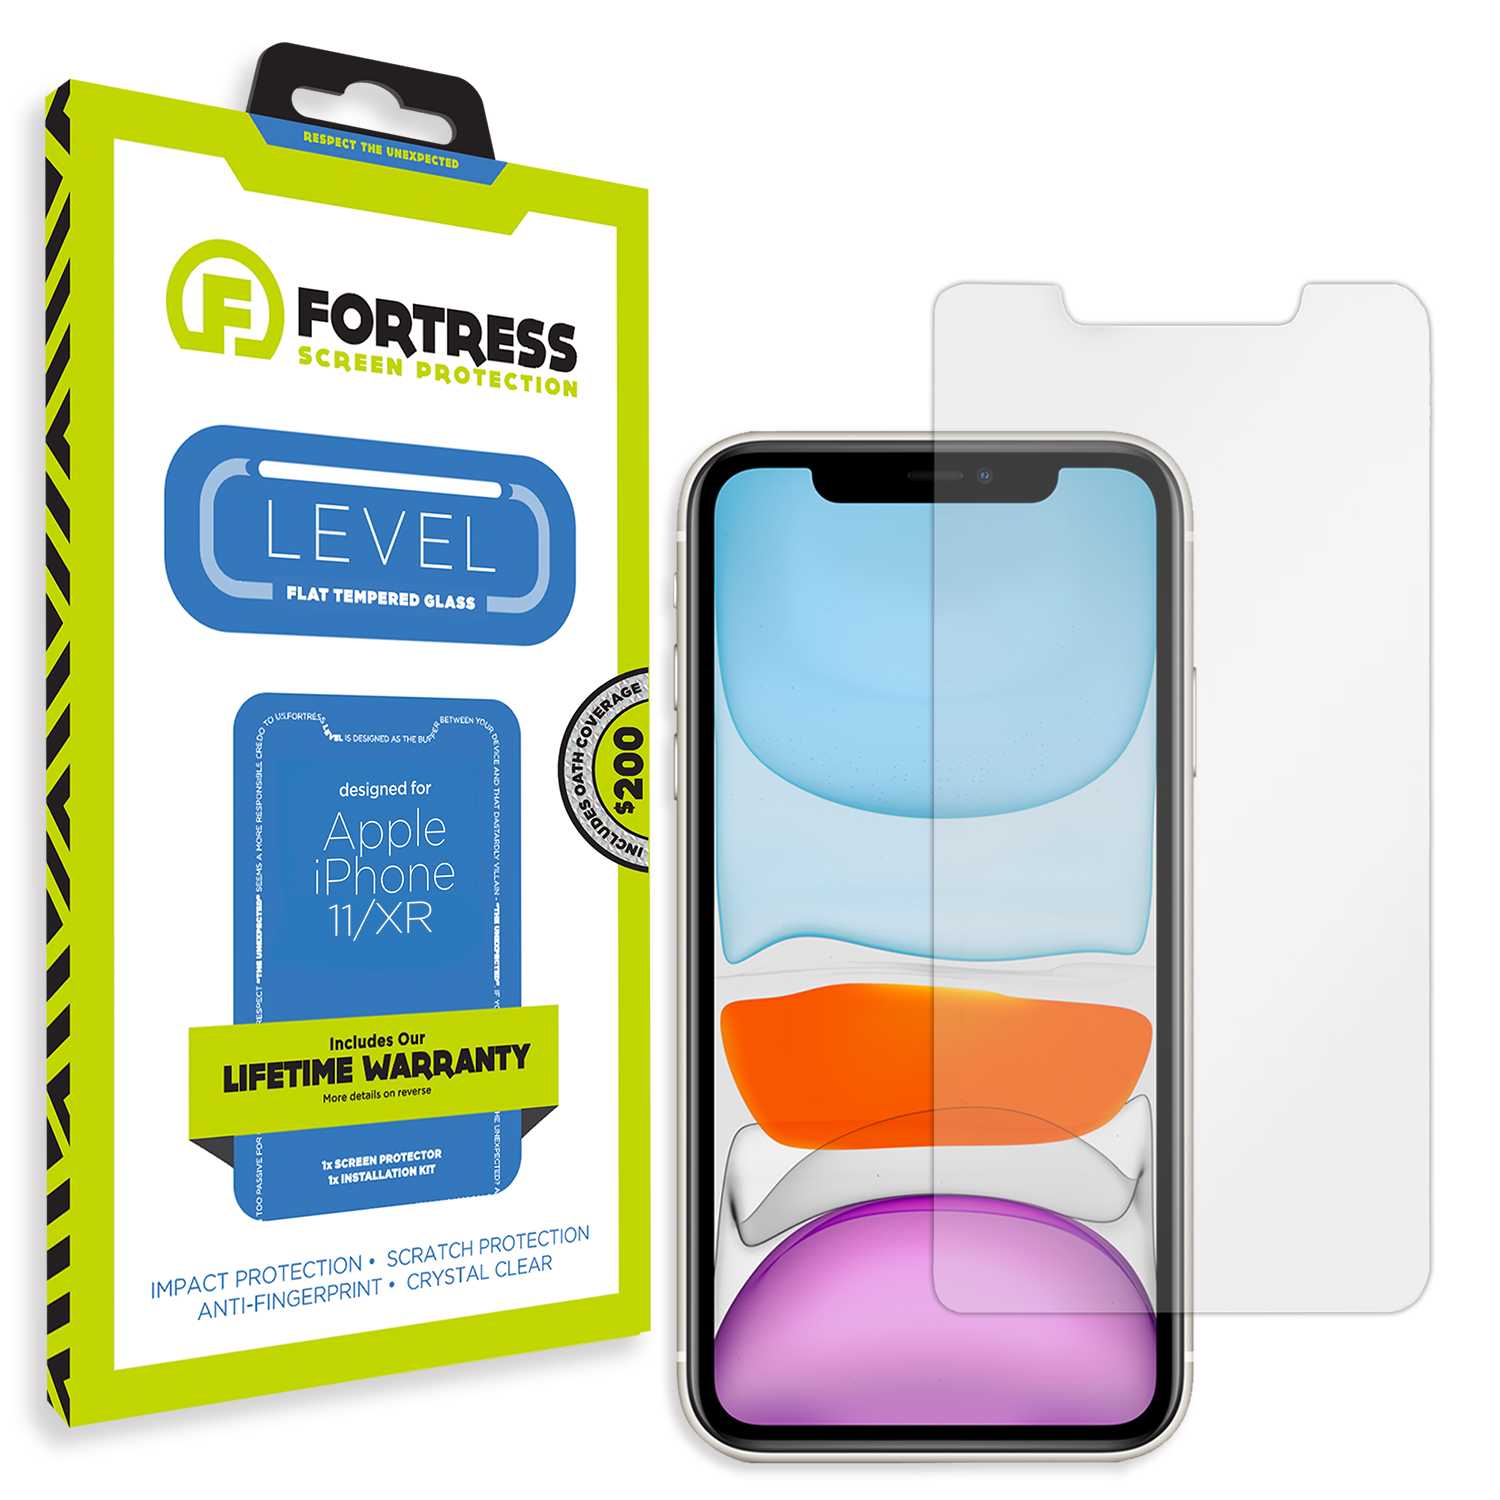 Fortress iPhone 11 Screen Protector $200Coverage Scooch Screen Protector